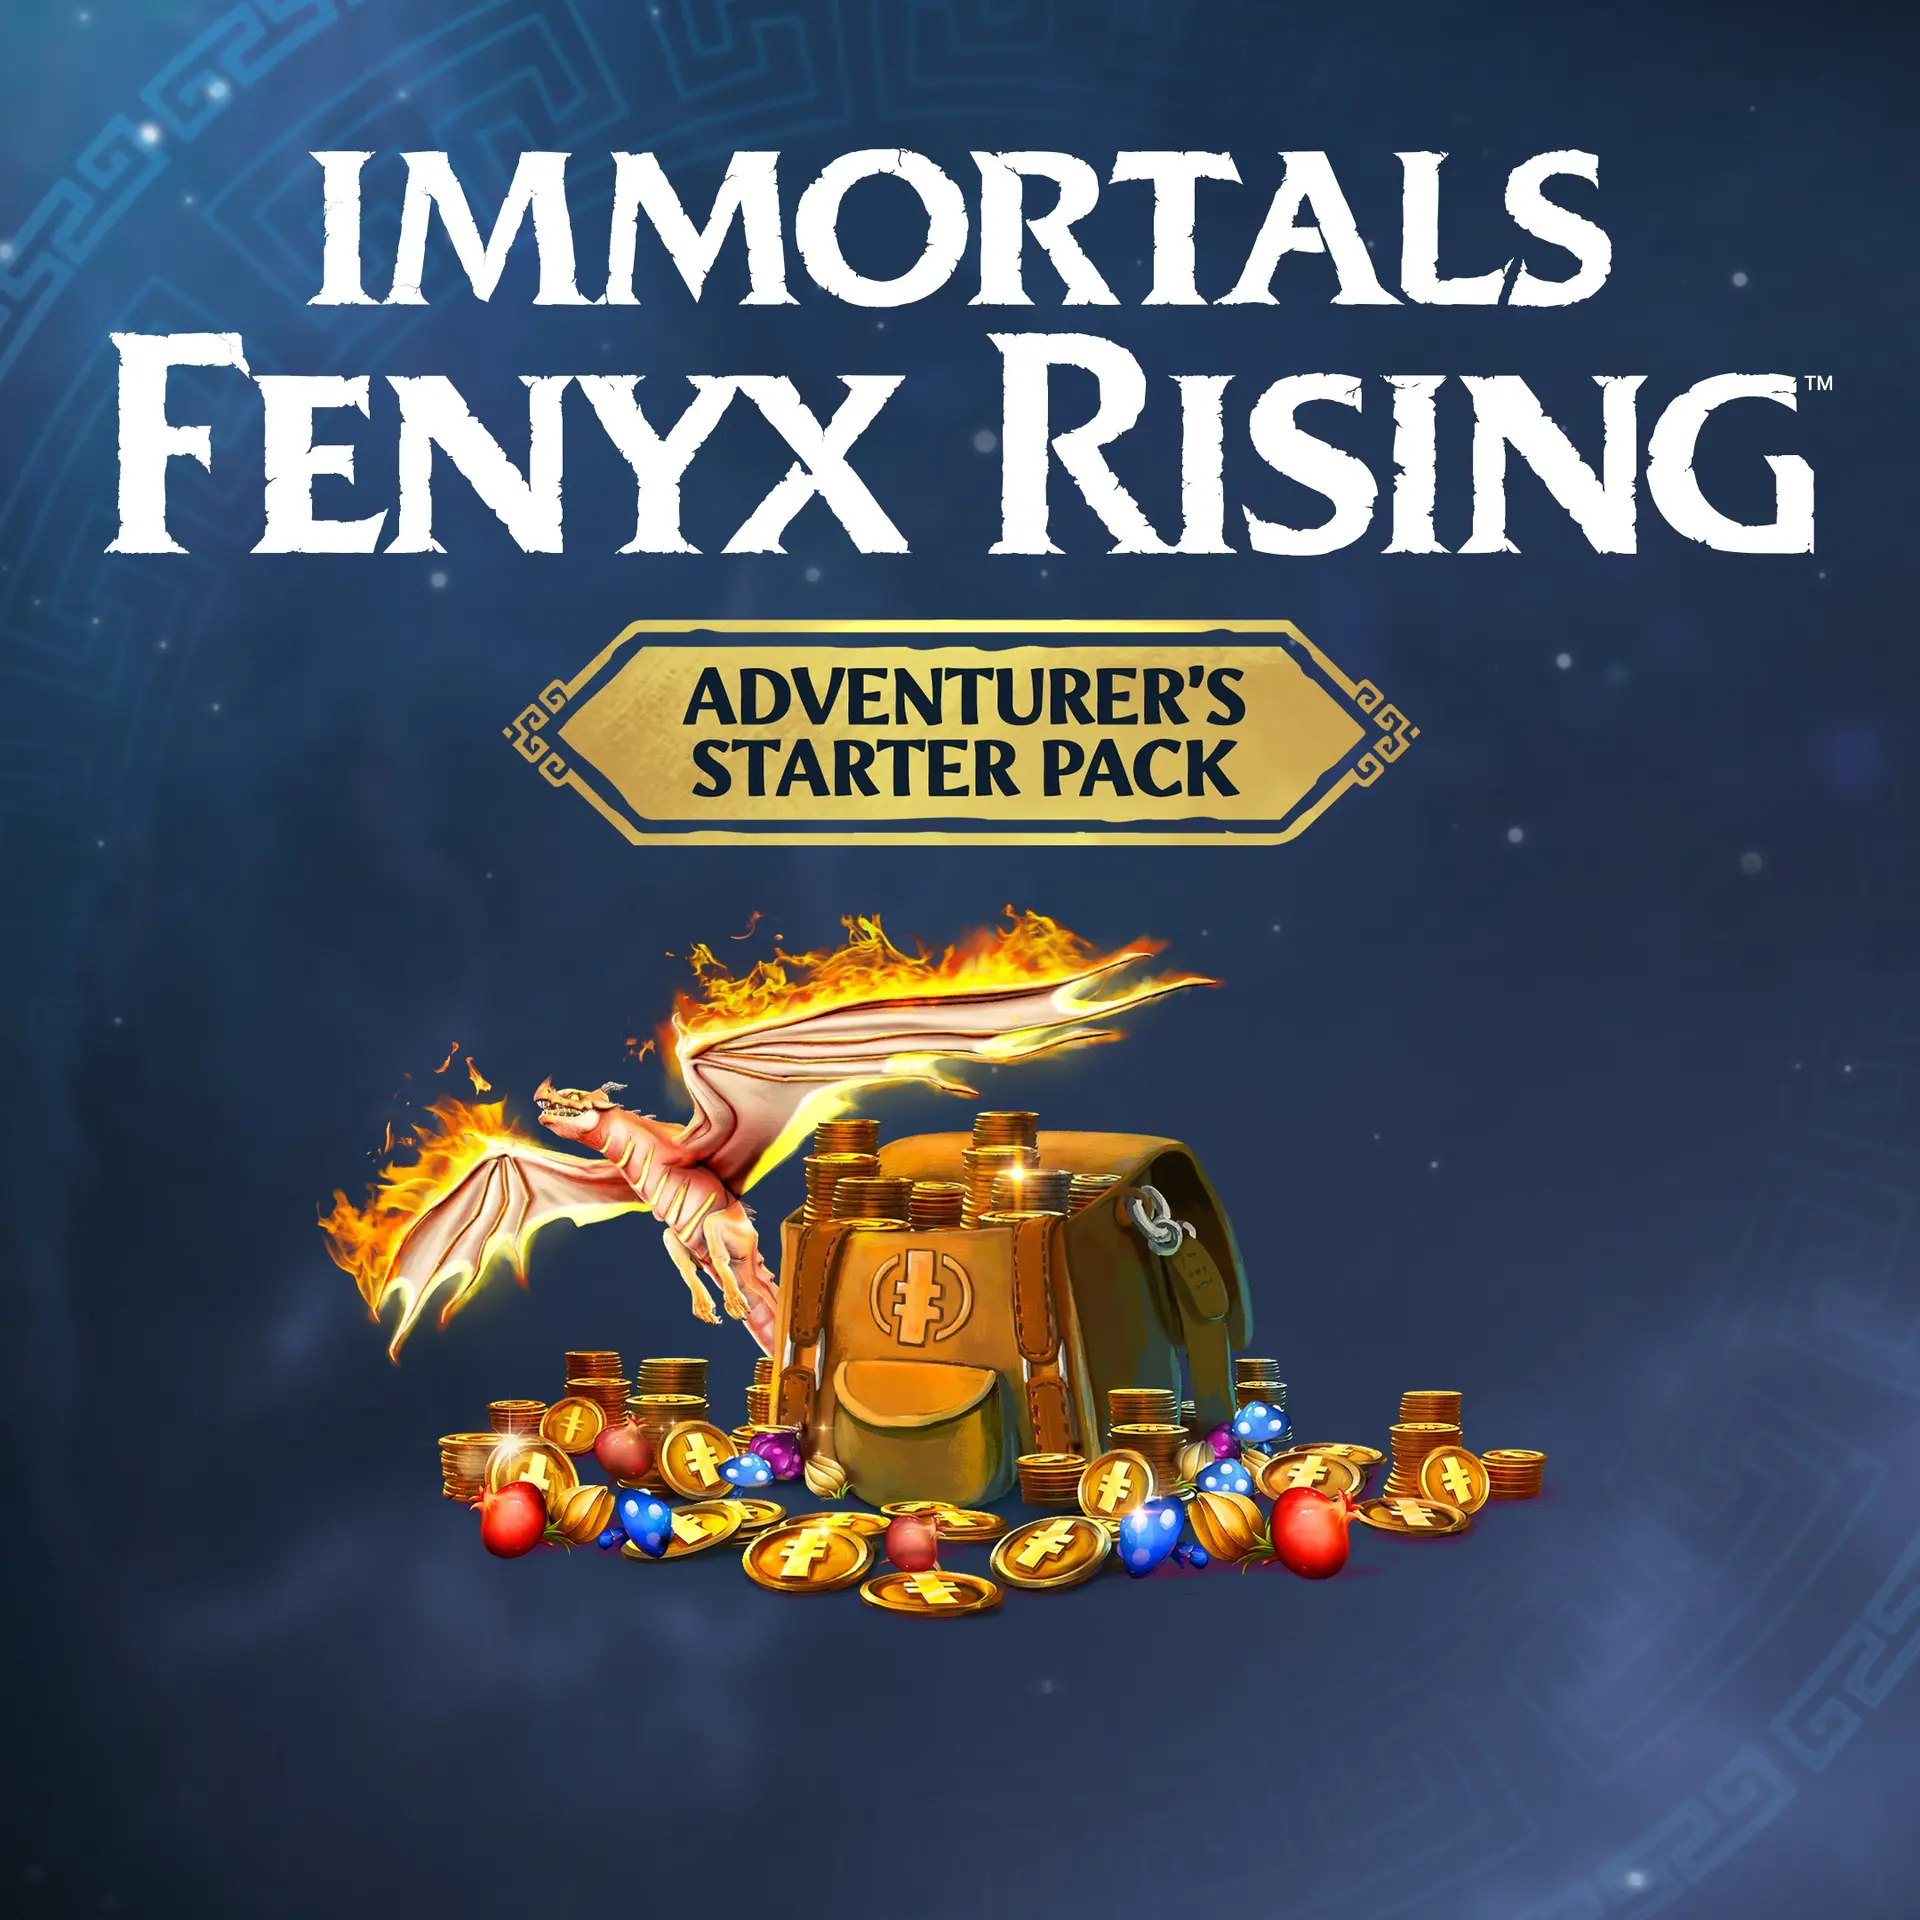 Immortals Fenyx Rising Adventurer's Starter Pack (3,000 Credits + Items) (Xbox Games BR)